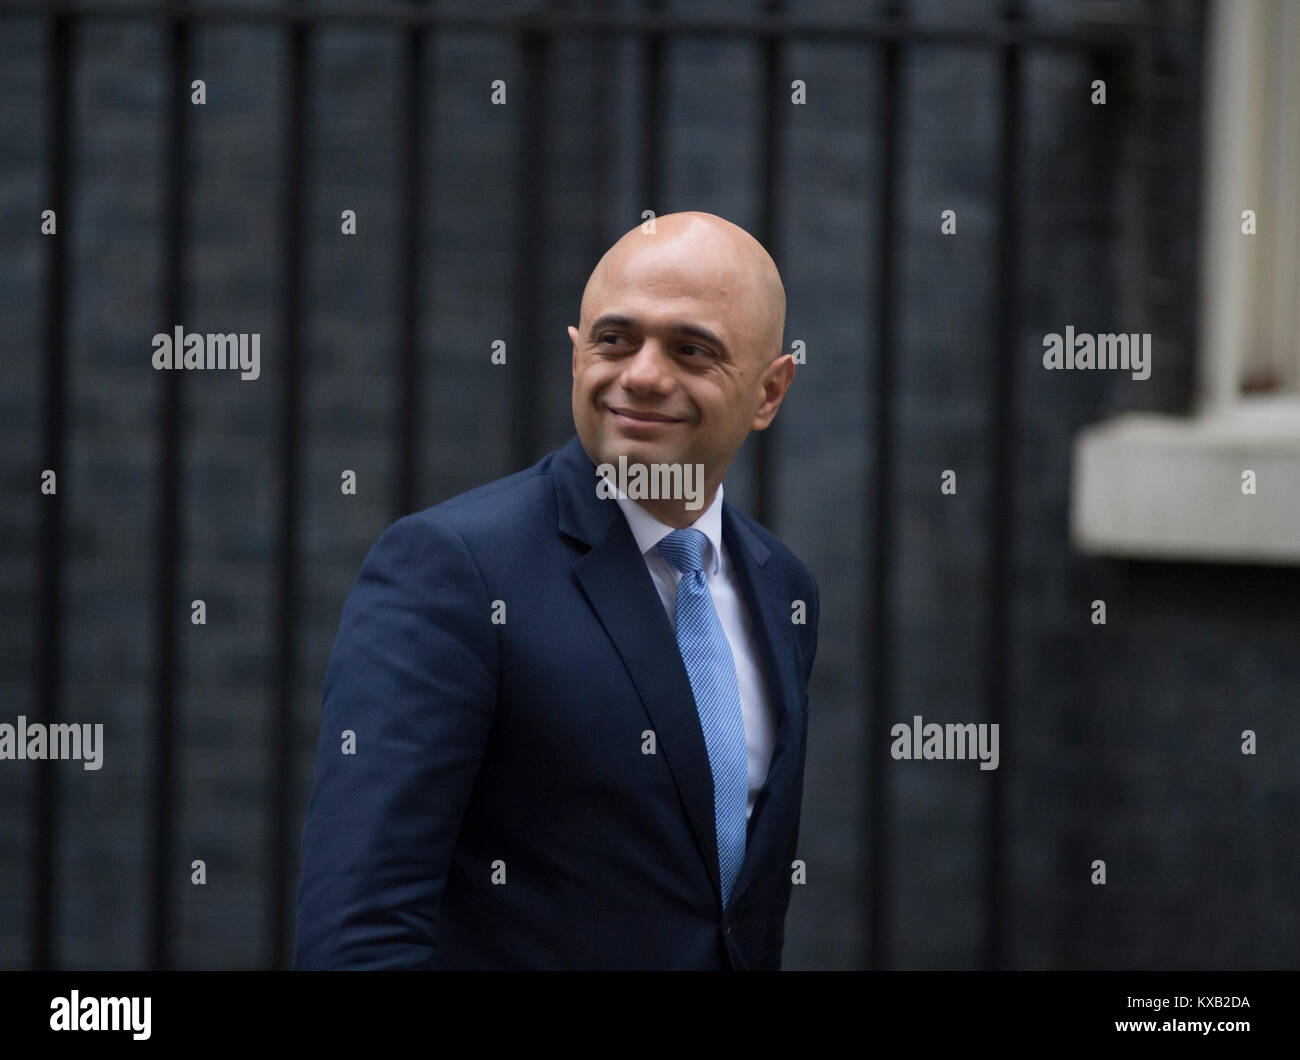 Downing Street, London, UK. 9th Jan, 2018. Government ministers old and new in Downing Street for weekly cabinet meeting on day following Cabinet reshuffle. Sajid Javid, Secretary of State for Housing, Communities and Local Government, leaving. Credit: Malcolm Park/Alamy Live News. Stock Photo